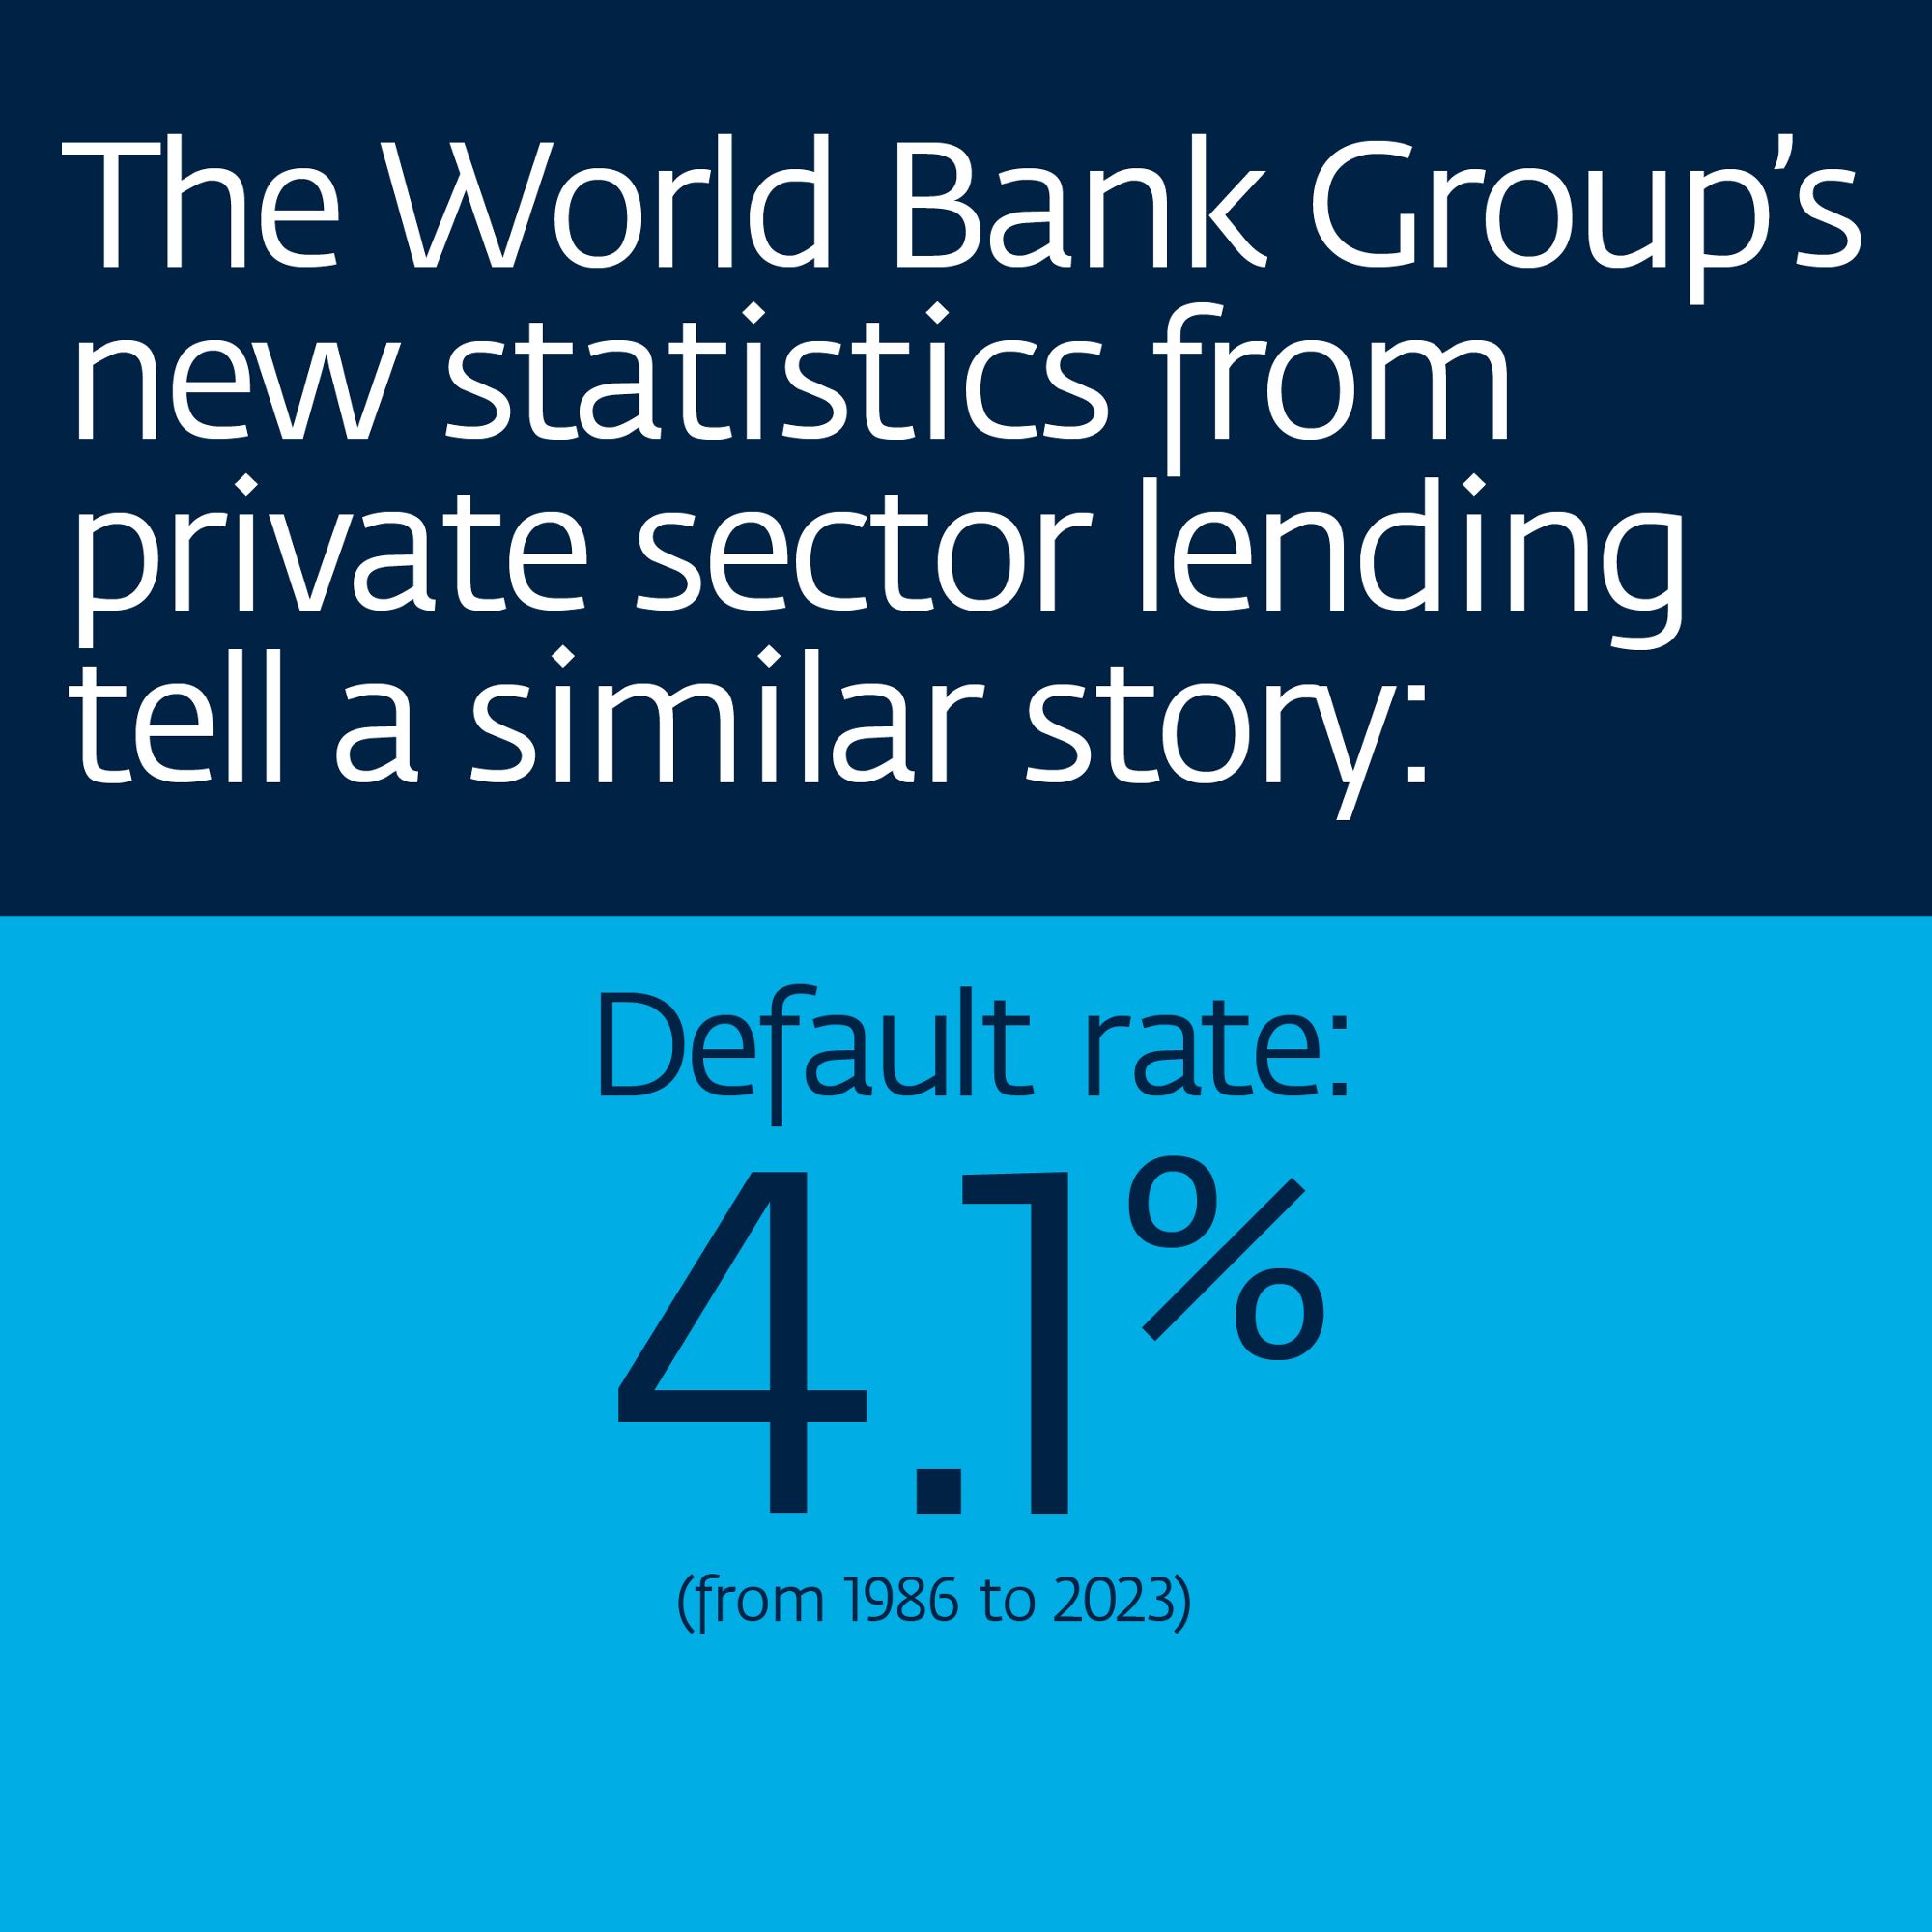 World Bank Group's new statistics from private sector lending shows a default rate of 4.1% (from 1986 to 2023).